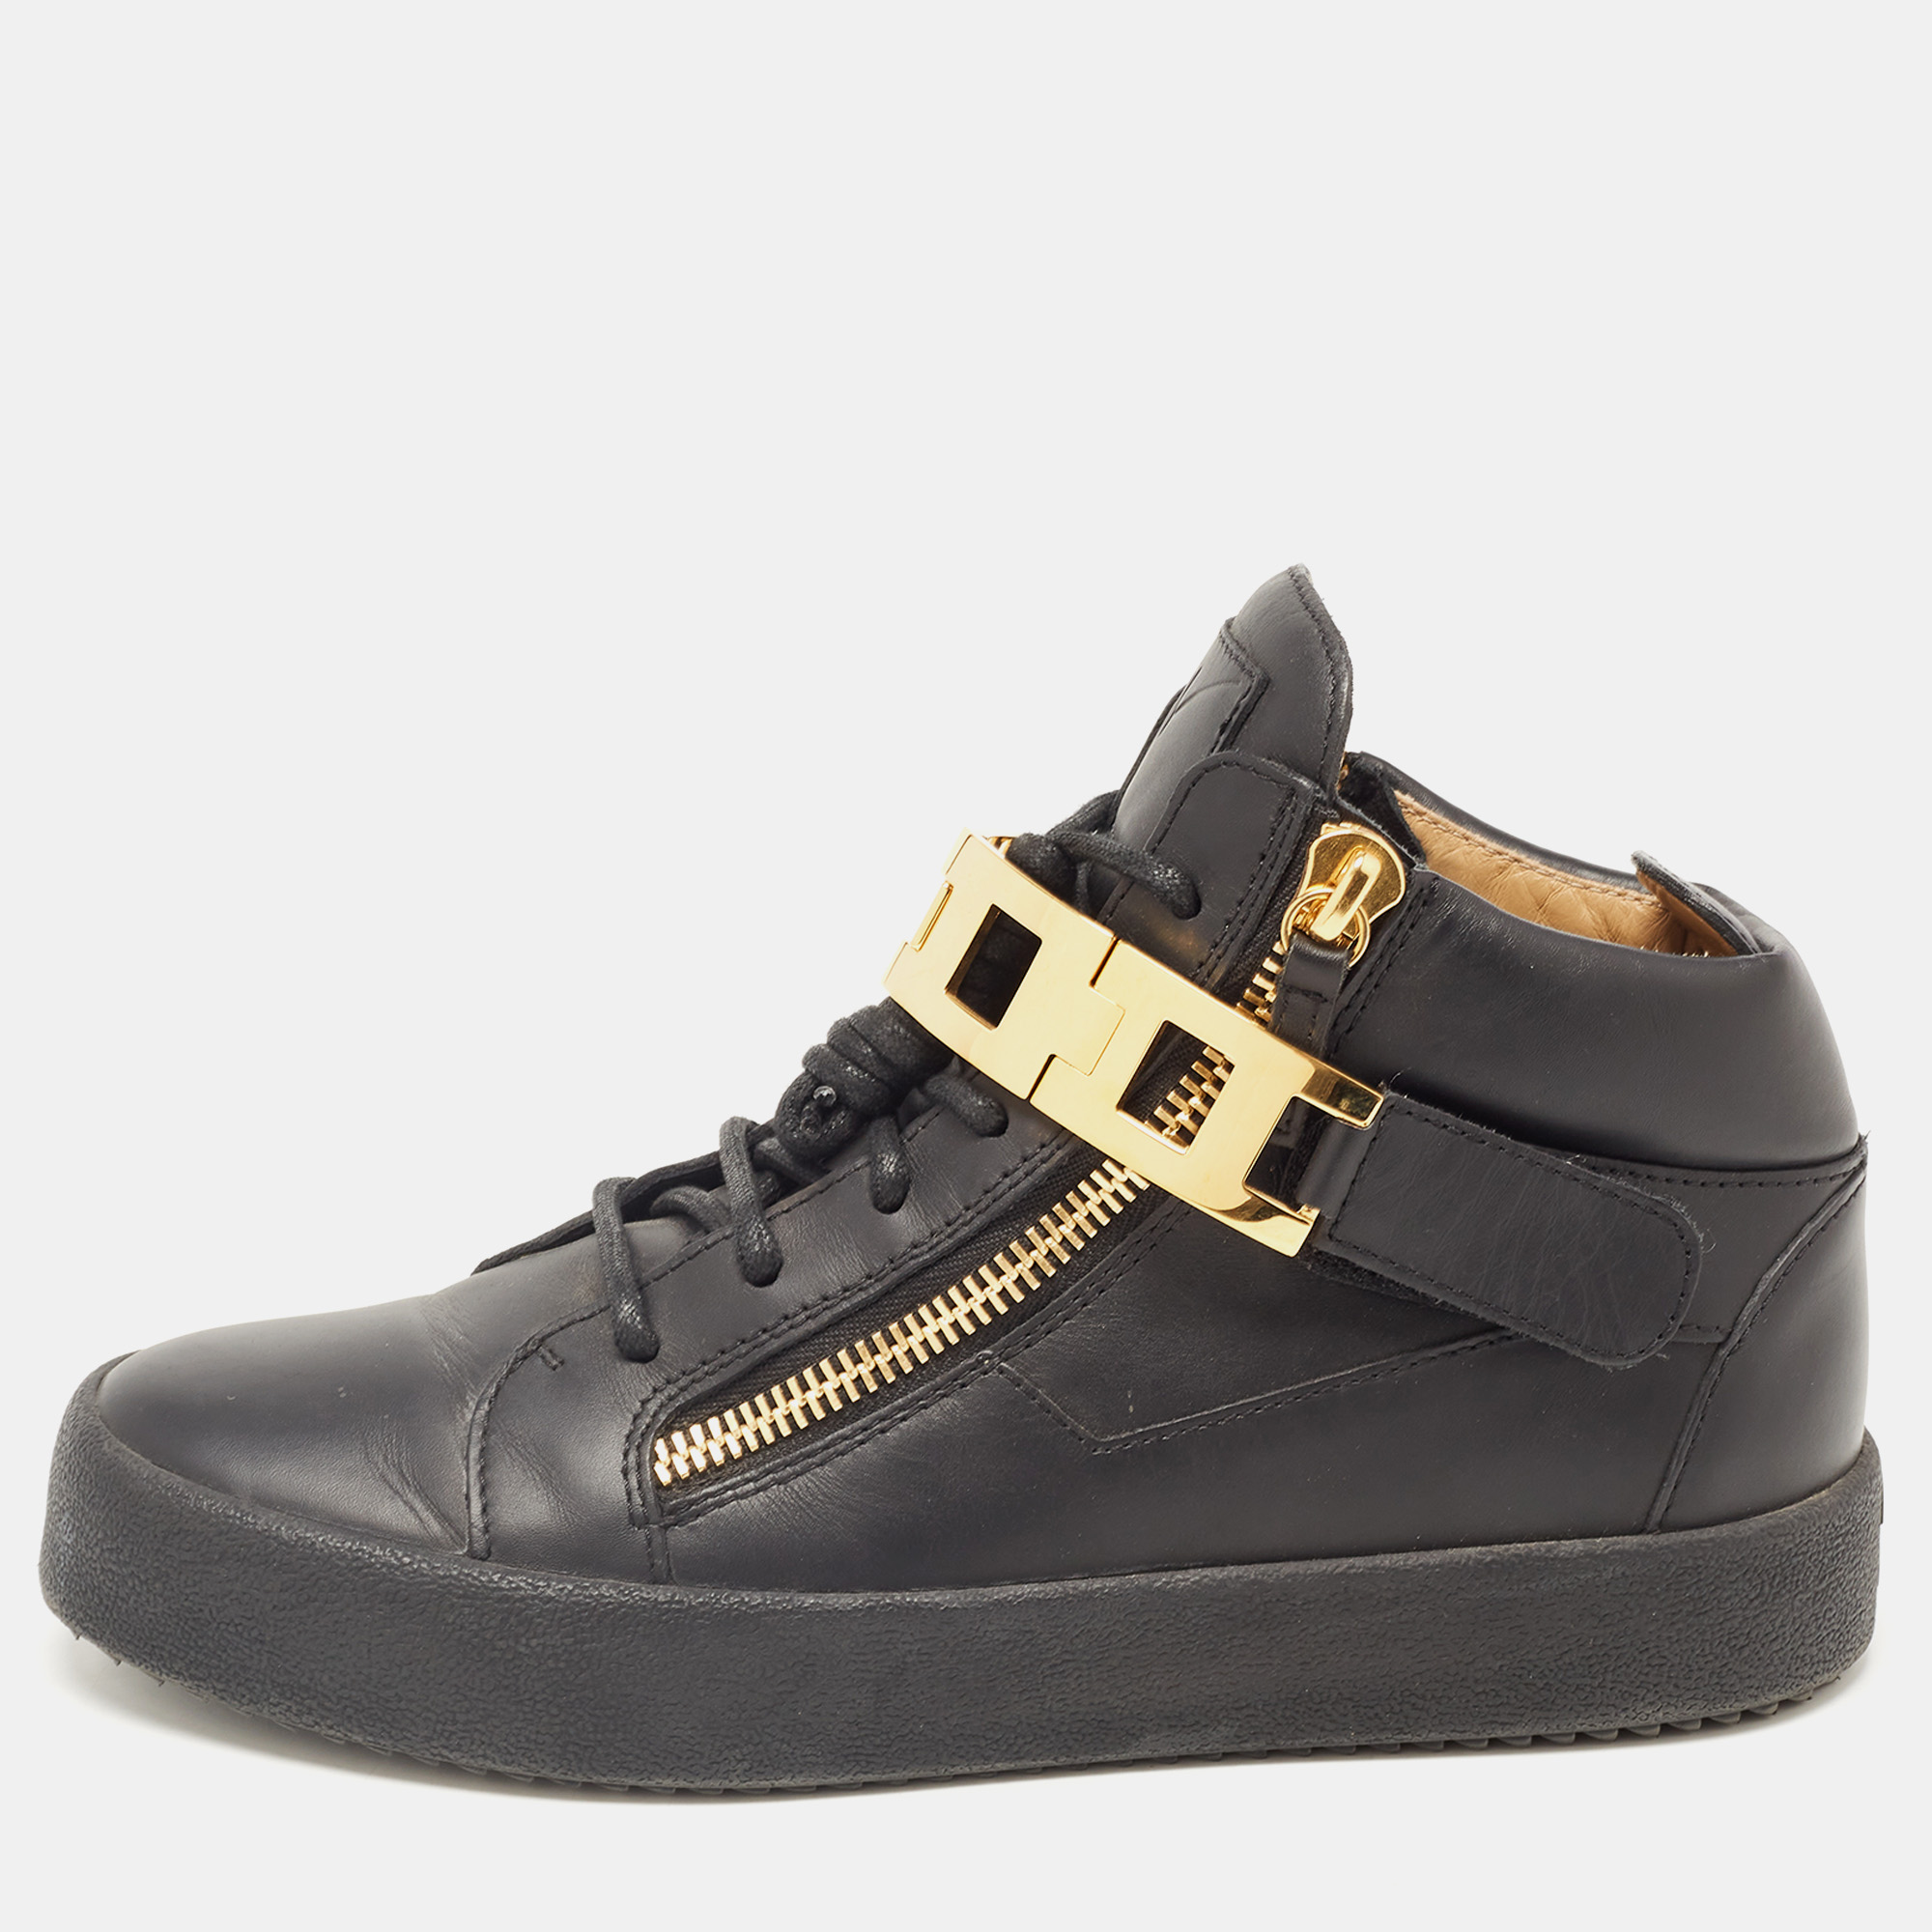 Give your outfit a luxe update with this pair of Giuseppe Zanotti mens sneakers. The shoes are sewn perfectly to help you make a statement in them for a long time.